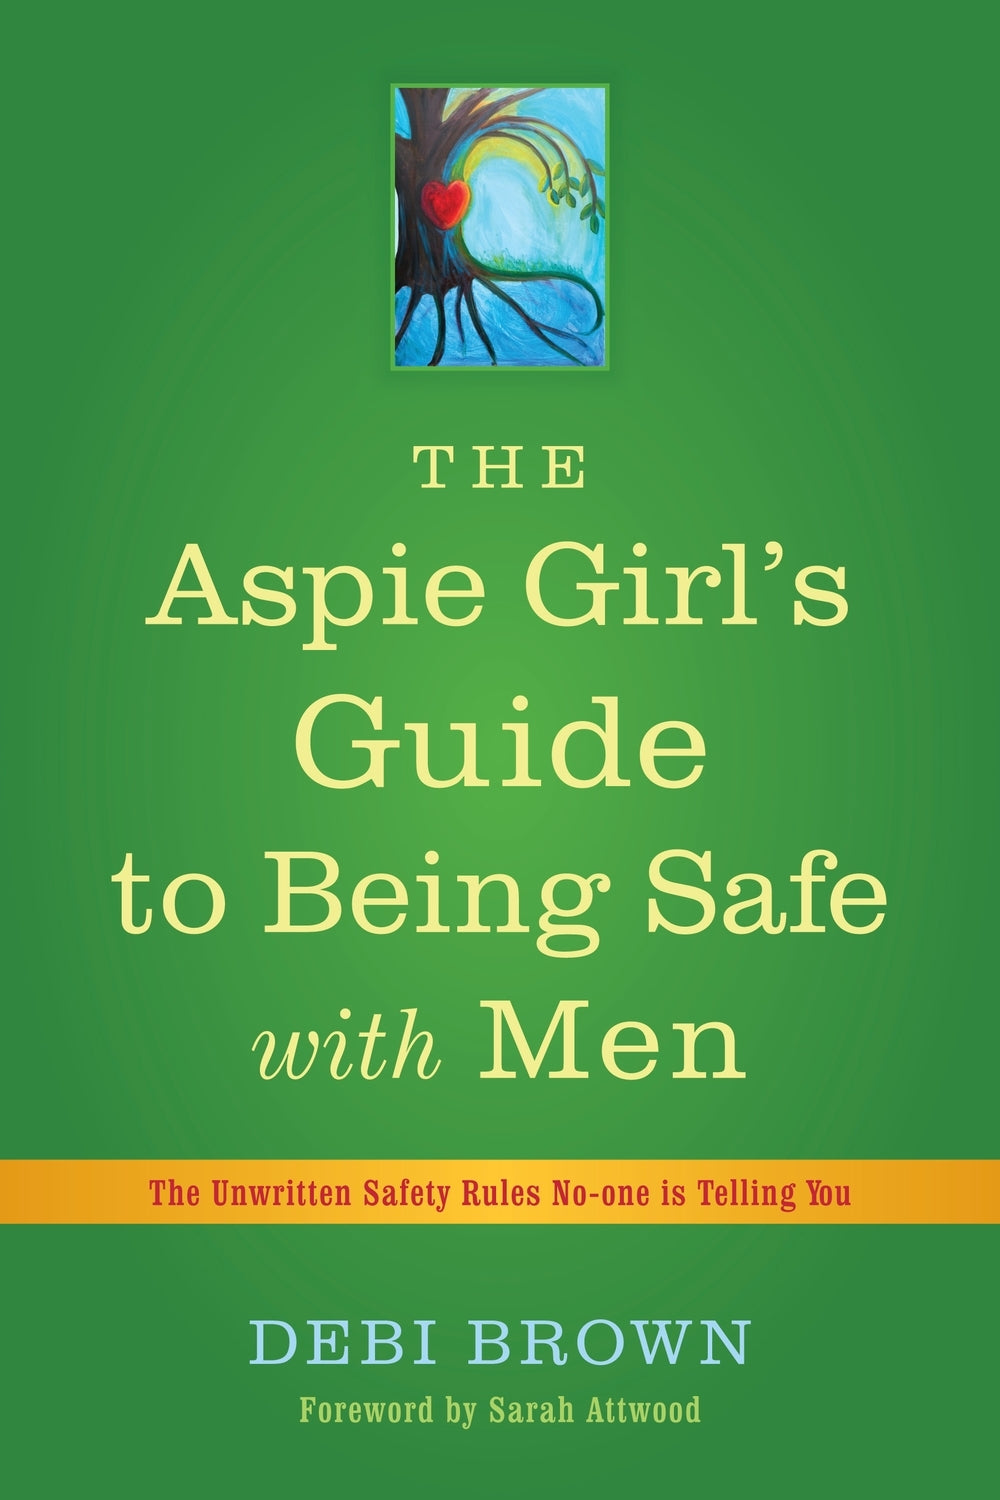 The Aspie Girl's Guide to Being Safe with Men by Debi Brown, Sarah Attwood